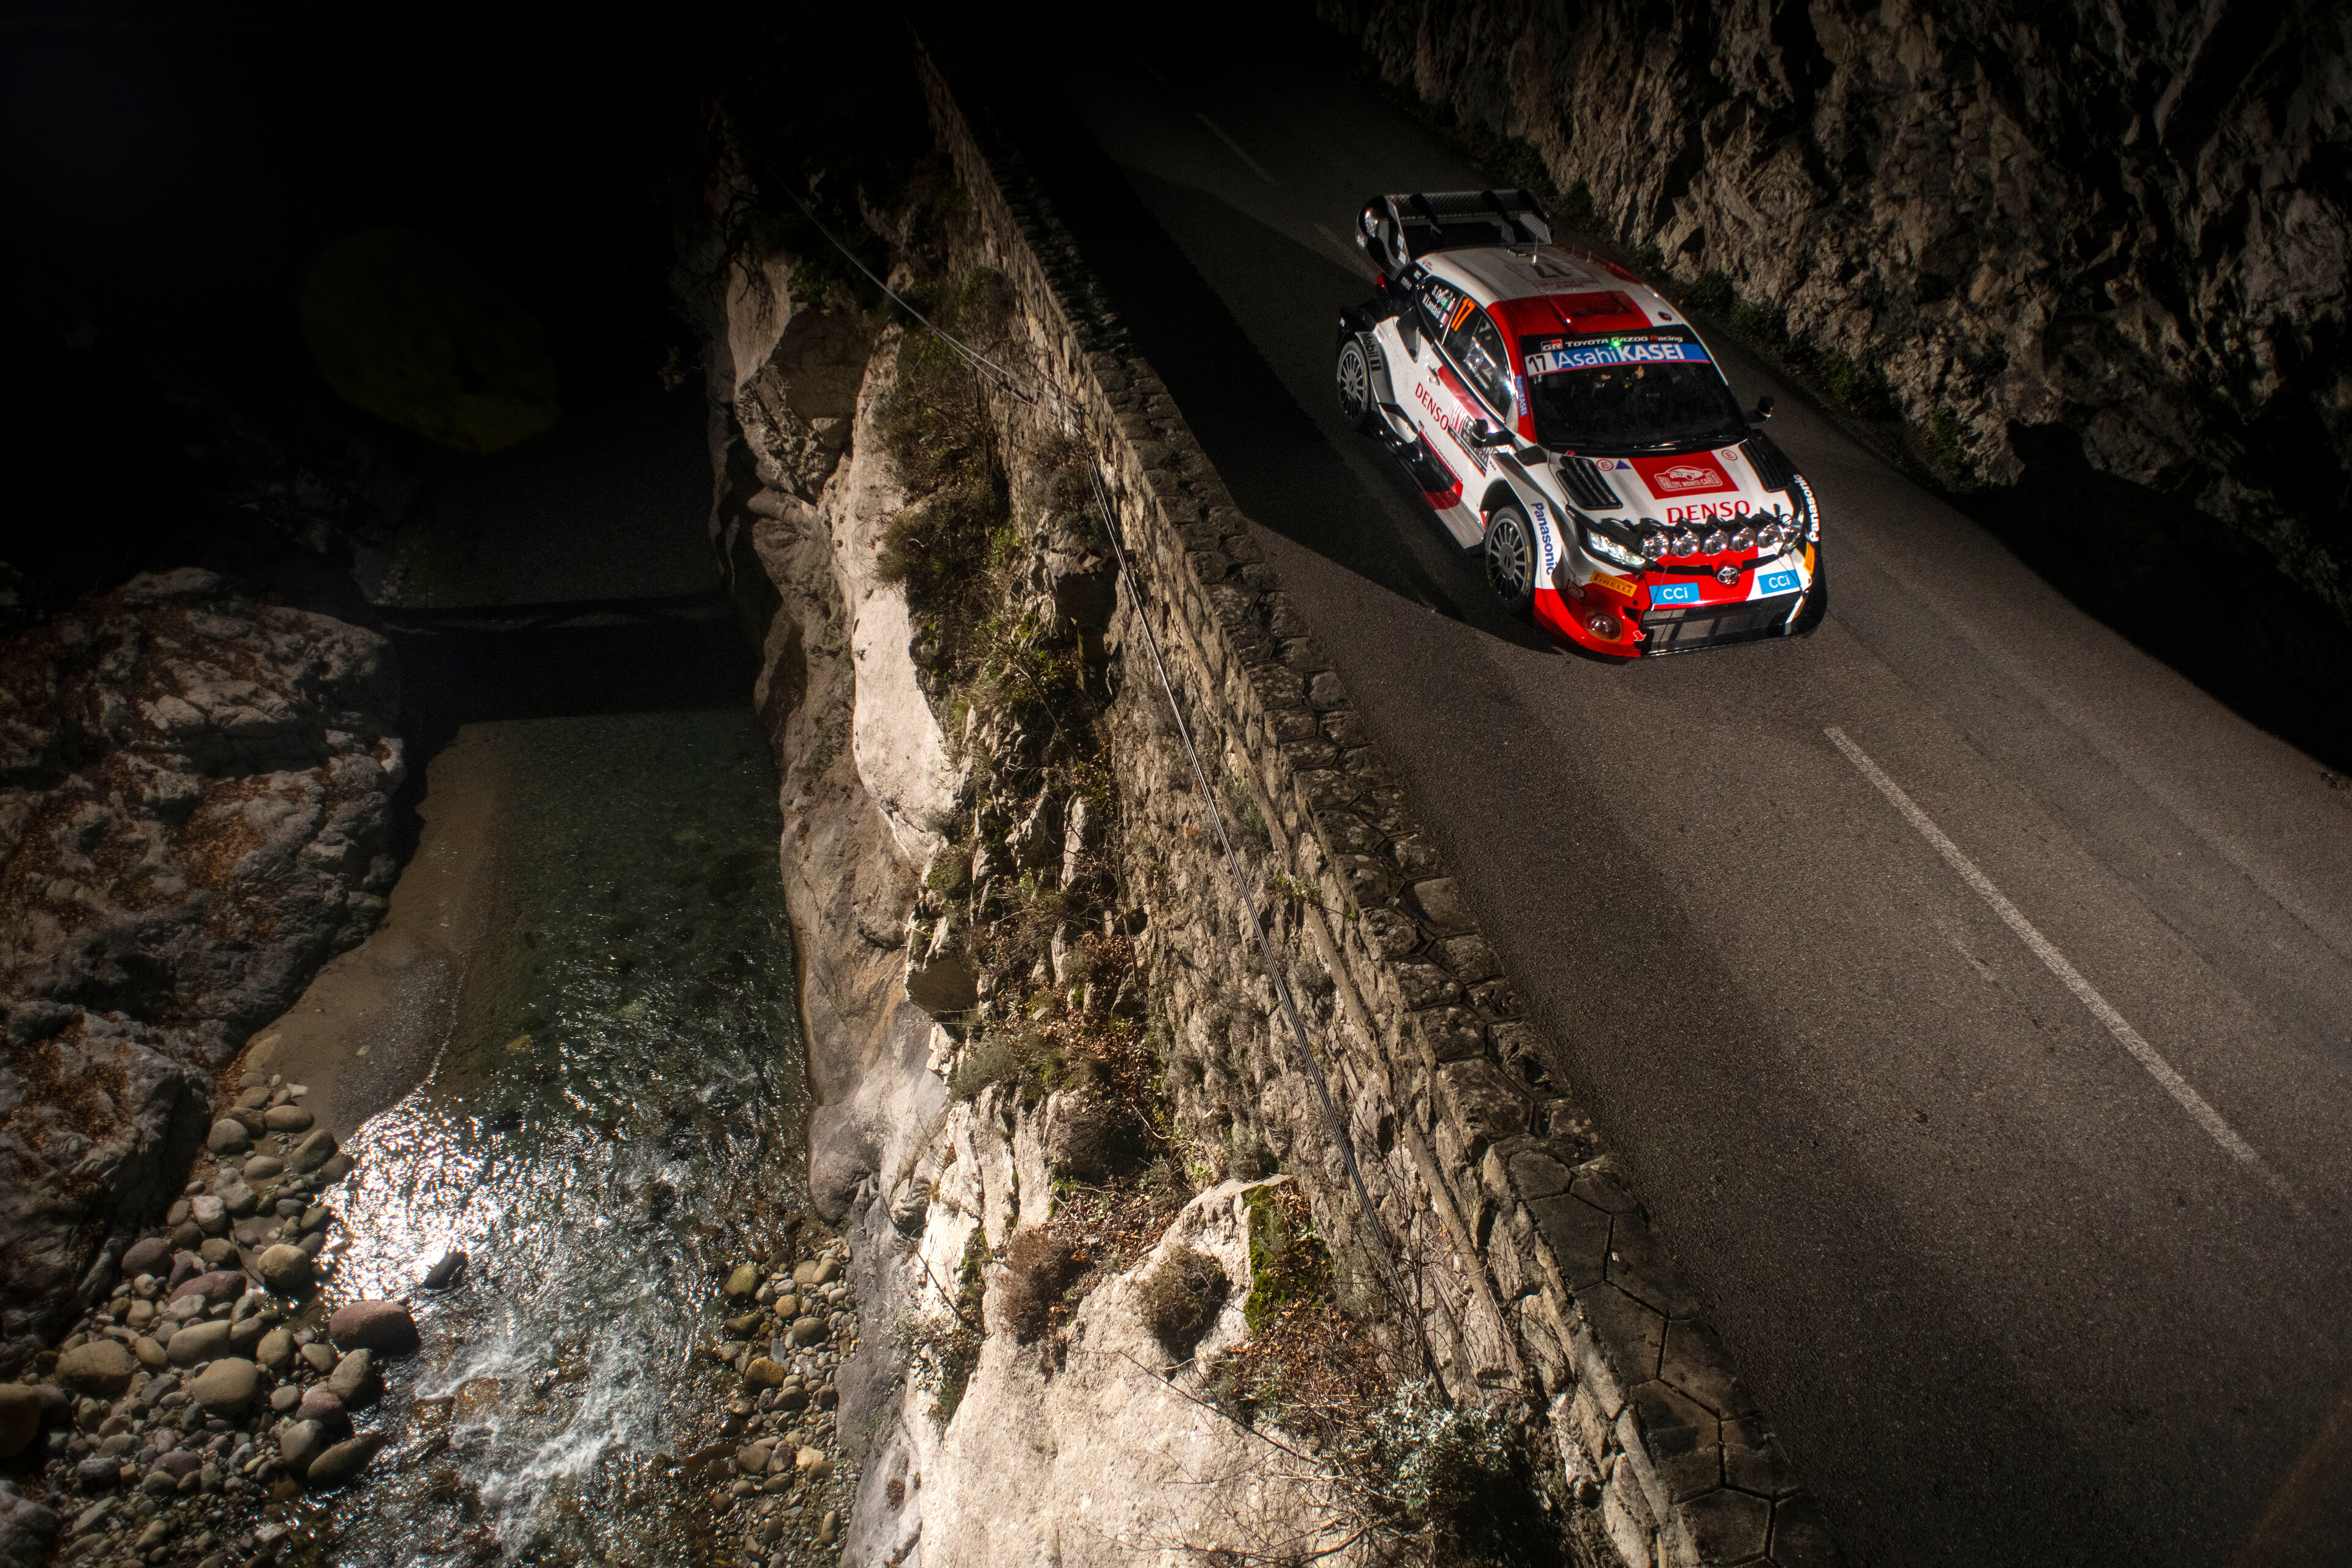 Sebastien Ogier (FRA), Vincent Landais (FRA) of  Team Toyota Gazoo Racing are seen performing during the World Rally Championship, Rallye Monte-Carlo 2023 (photo: Jaanus Ree / Red Bull Content Pool)